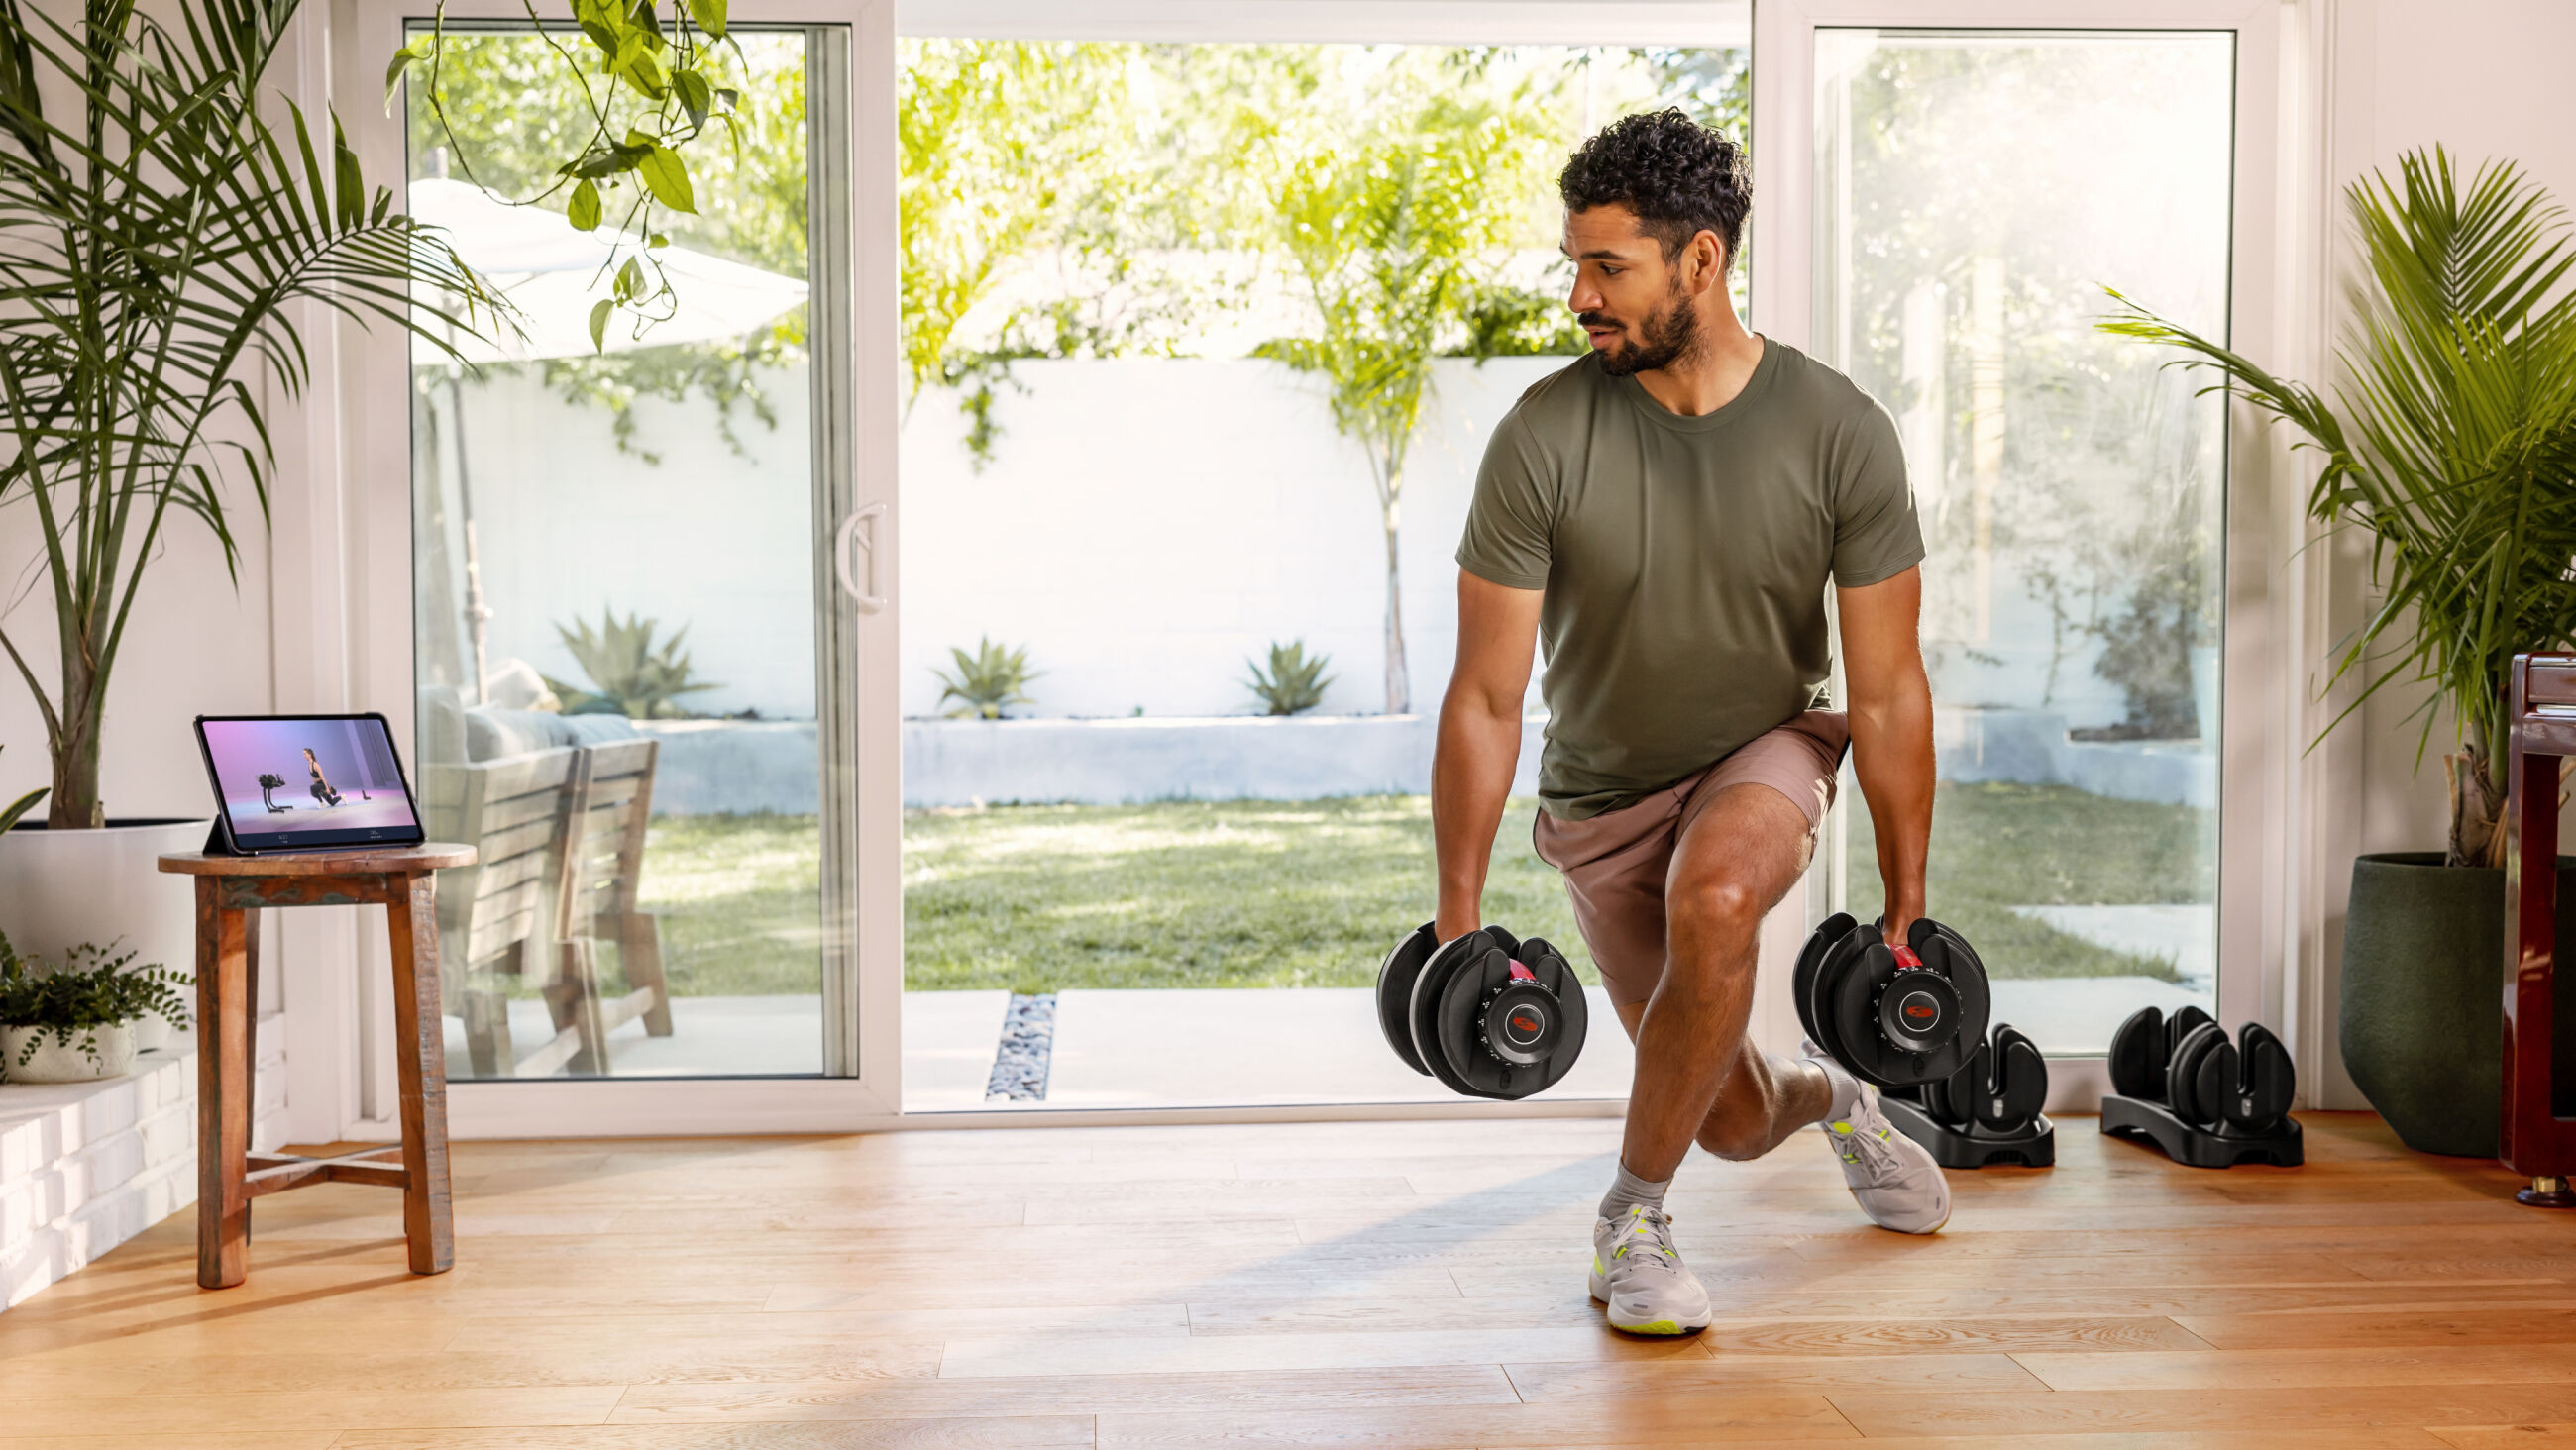 https://www.bowflex.com/dw/image/v2/AAYW_PRD/on/demandware.static/-/Sites-nautilus-master-catalog/default/dw7f105c74/images/bfx/weights/100131/552-dumbbell-curtsey-lunge-in-home-m-ll.jpg?sw=2600&sh=1464&sm=fit